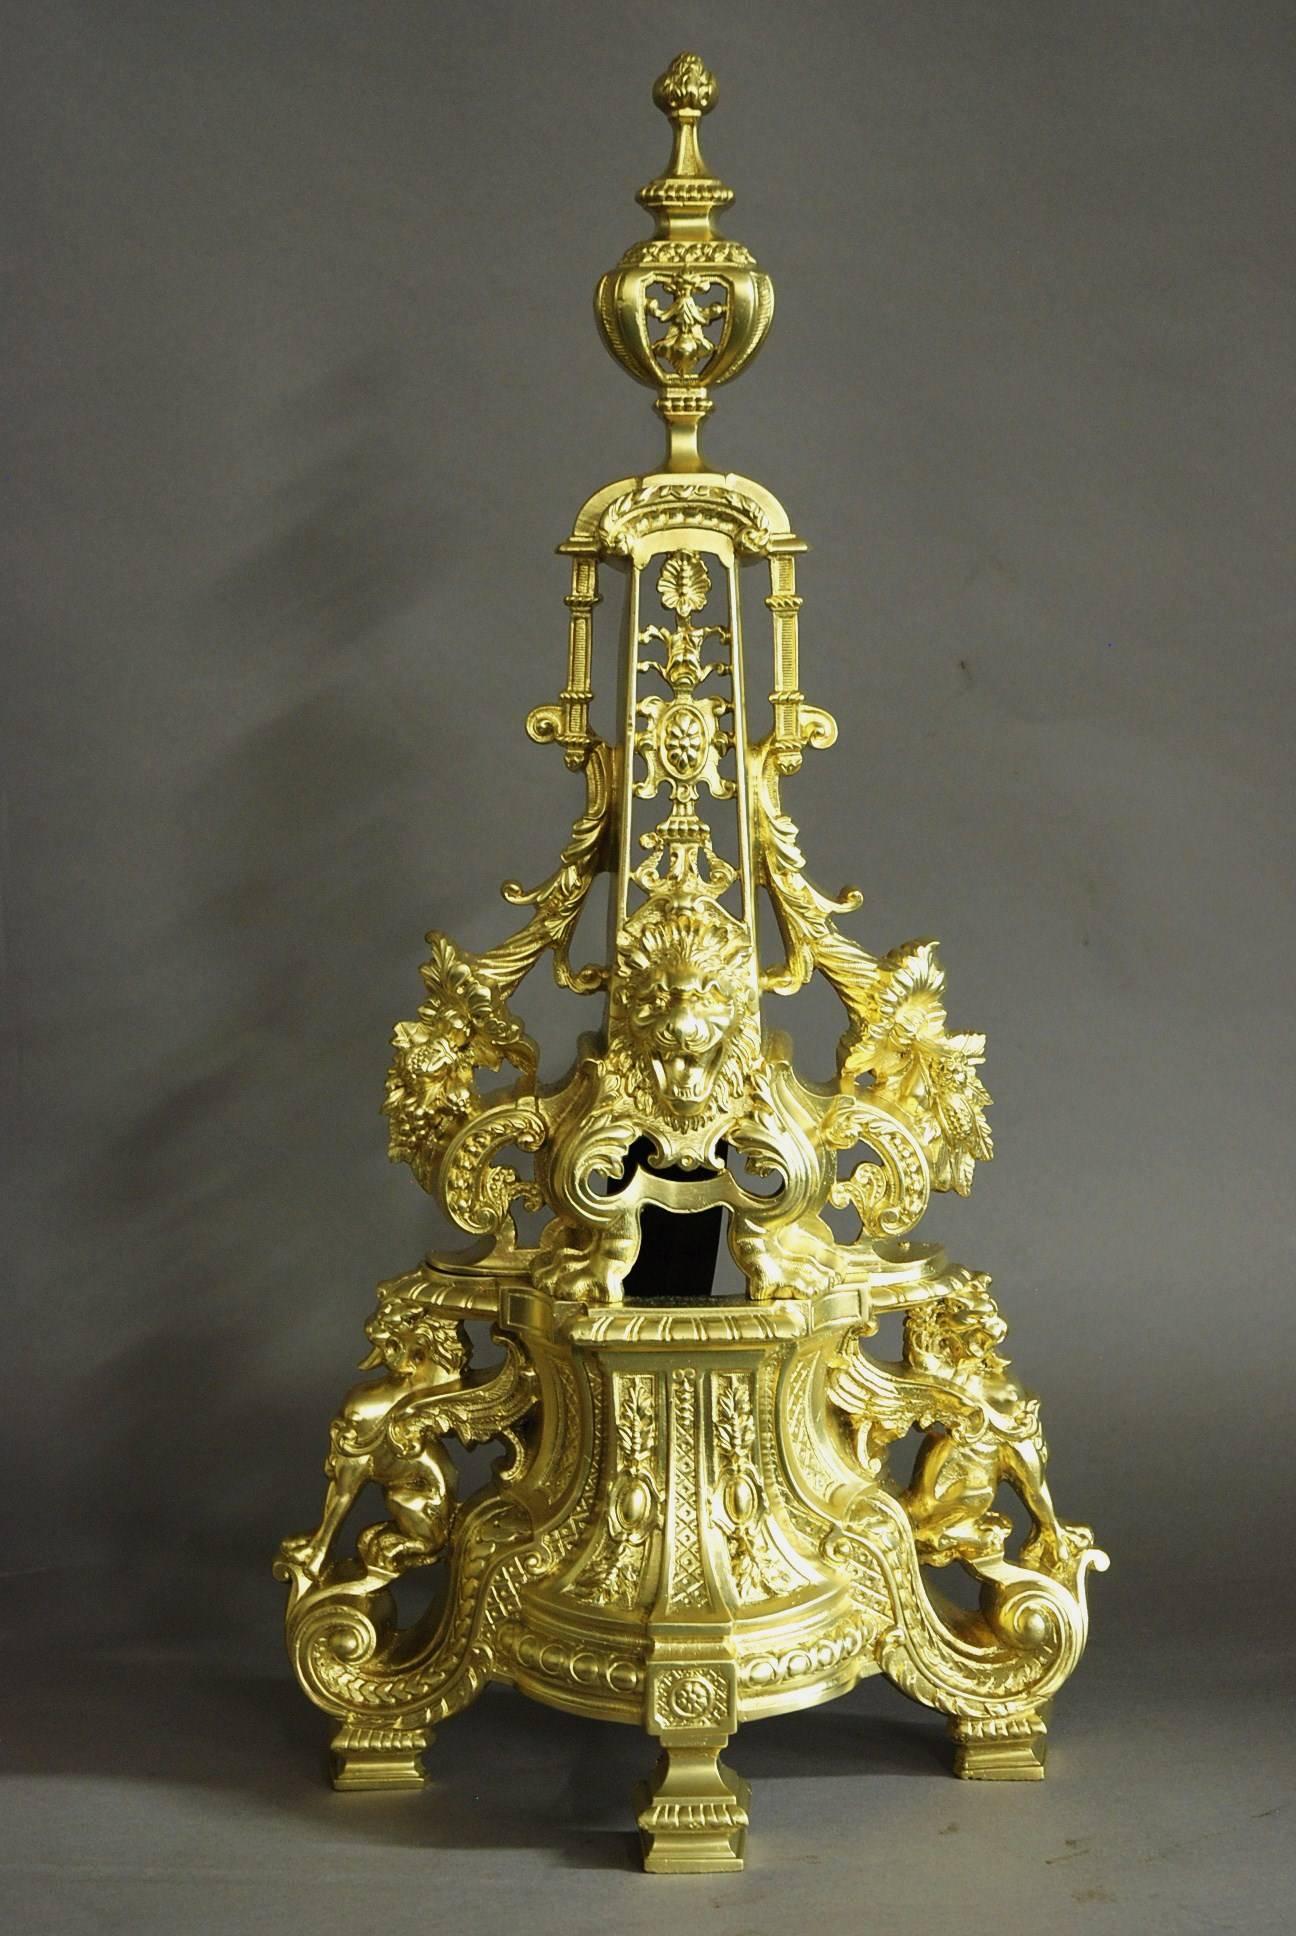 An extremely large and highly decorative pair of French 19th century brass chenets or fire dogs of superb quality.

These chenets are stunning pieces both due to their size and quality.

They consist of a decorative finial to the top leading